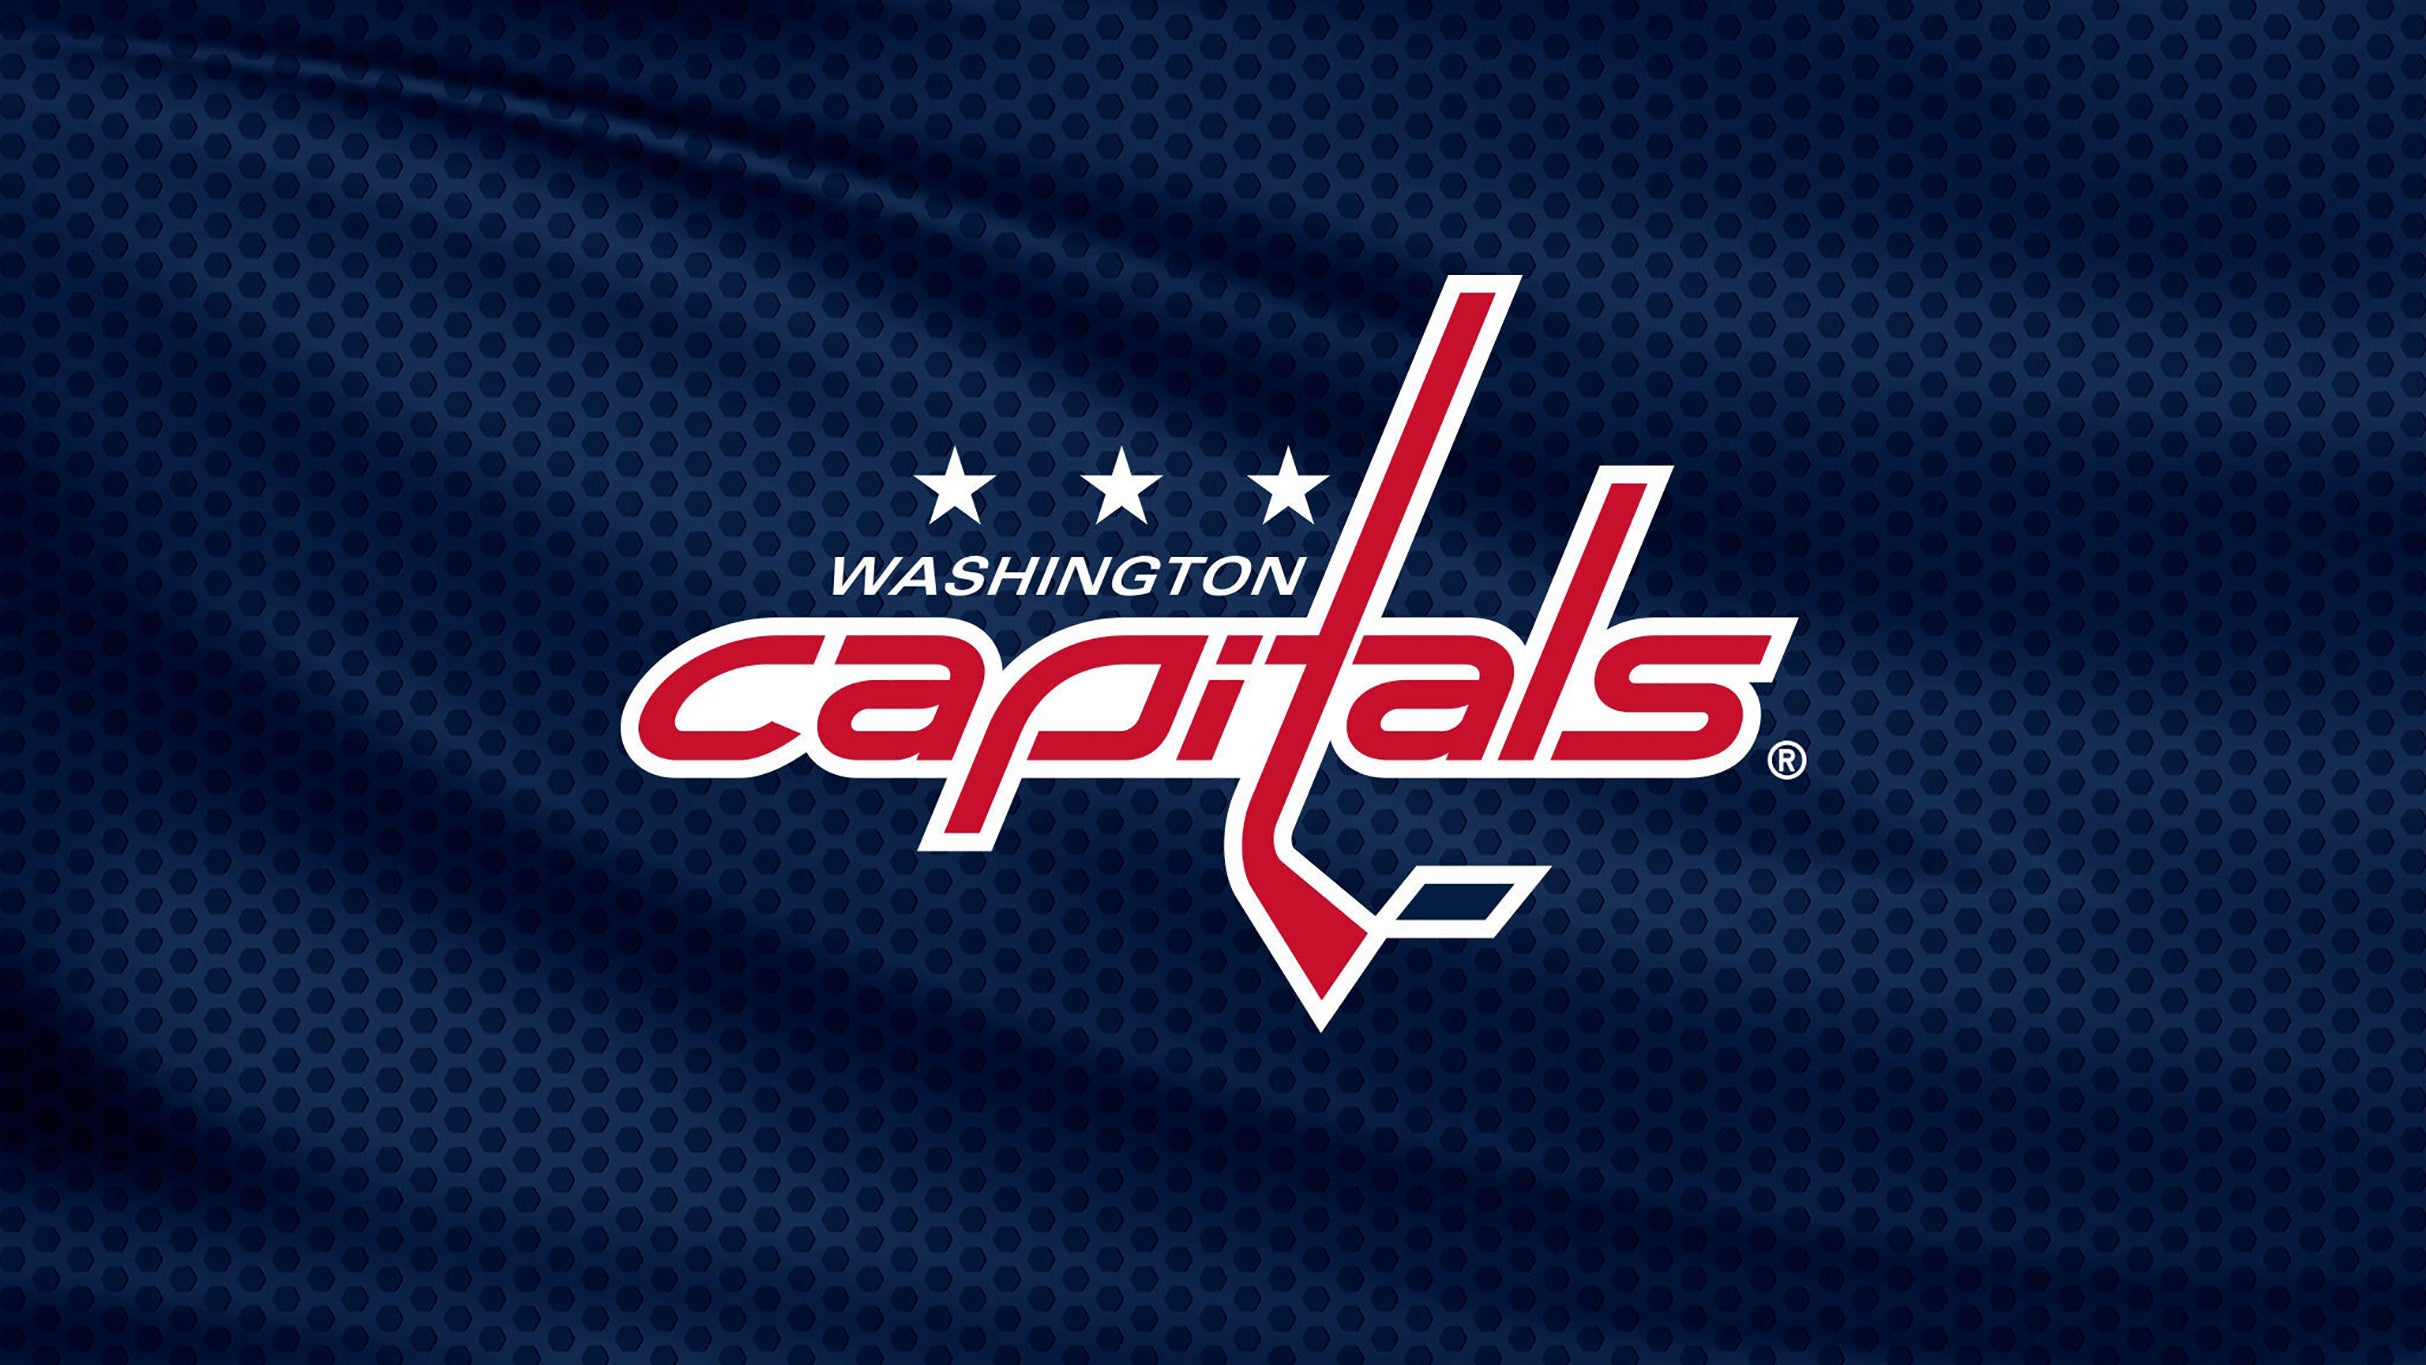 Capitals vs Maple Leafs (Pride) at Capital One Arena